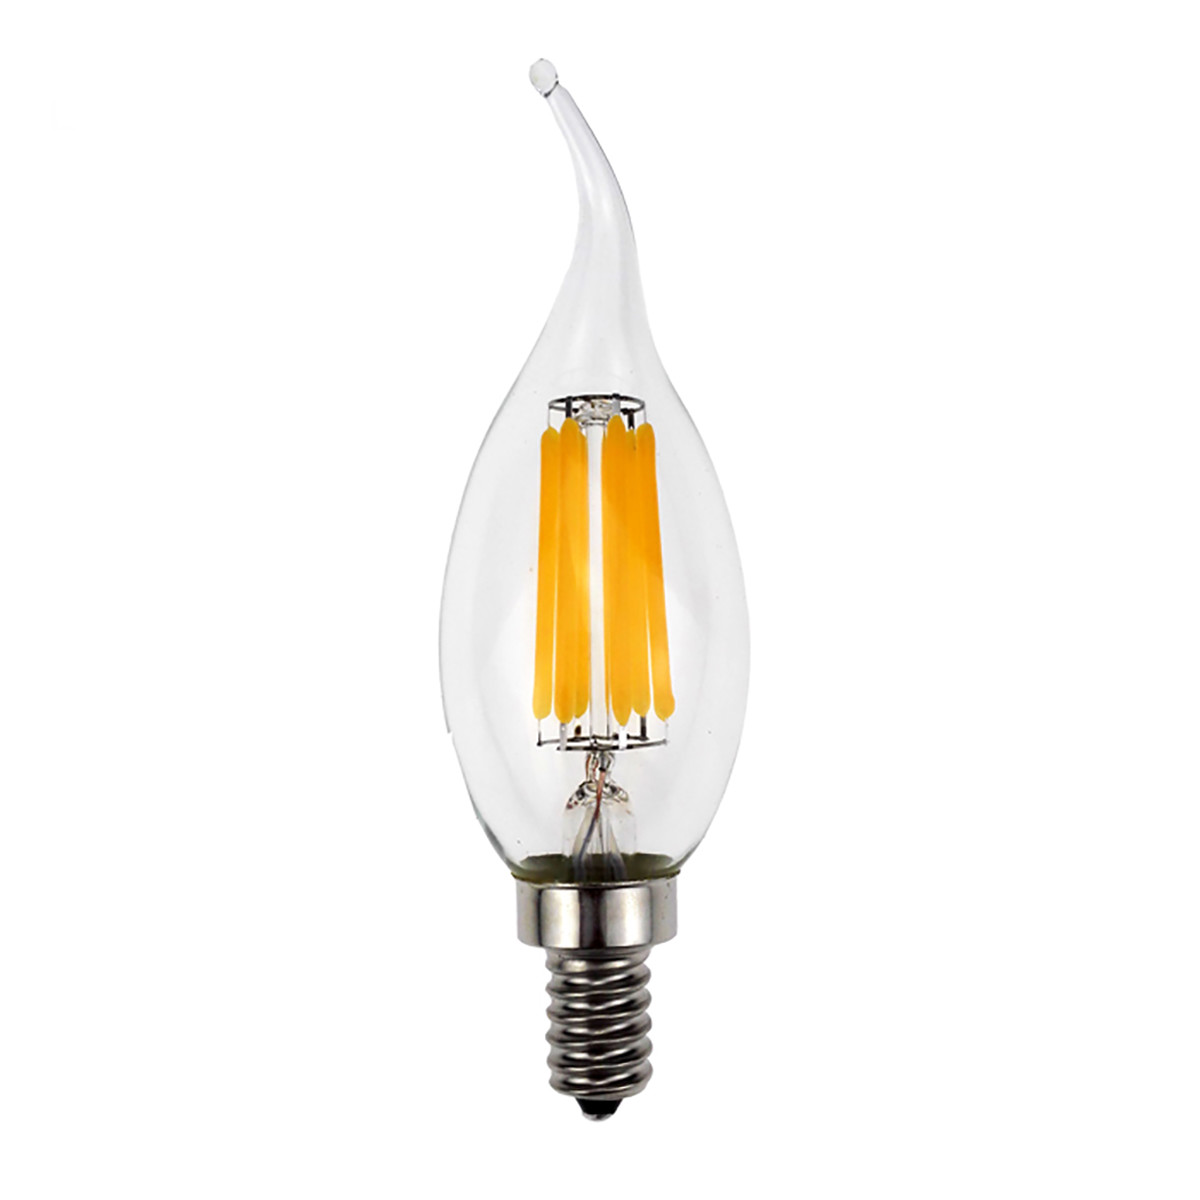 6W Filament LED Candle Light Bulb Light C35 Flame Tip Chandelier Bulb with E14 Base 60W Equivalent Halogen Replacement